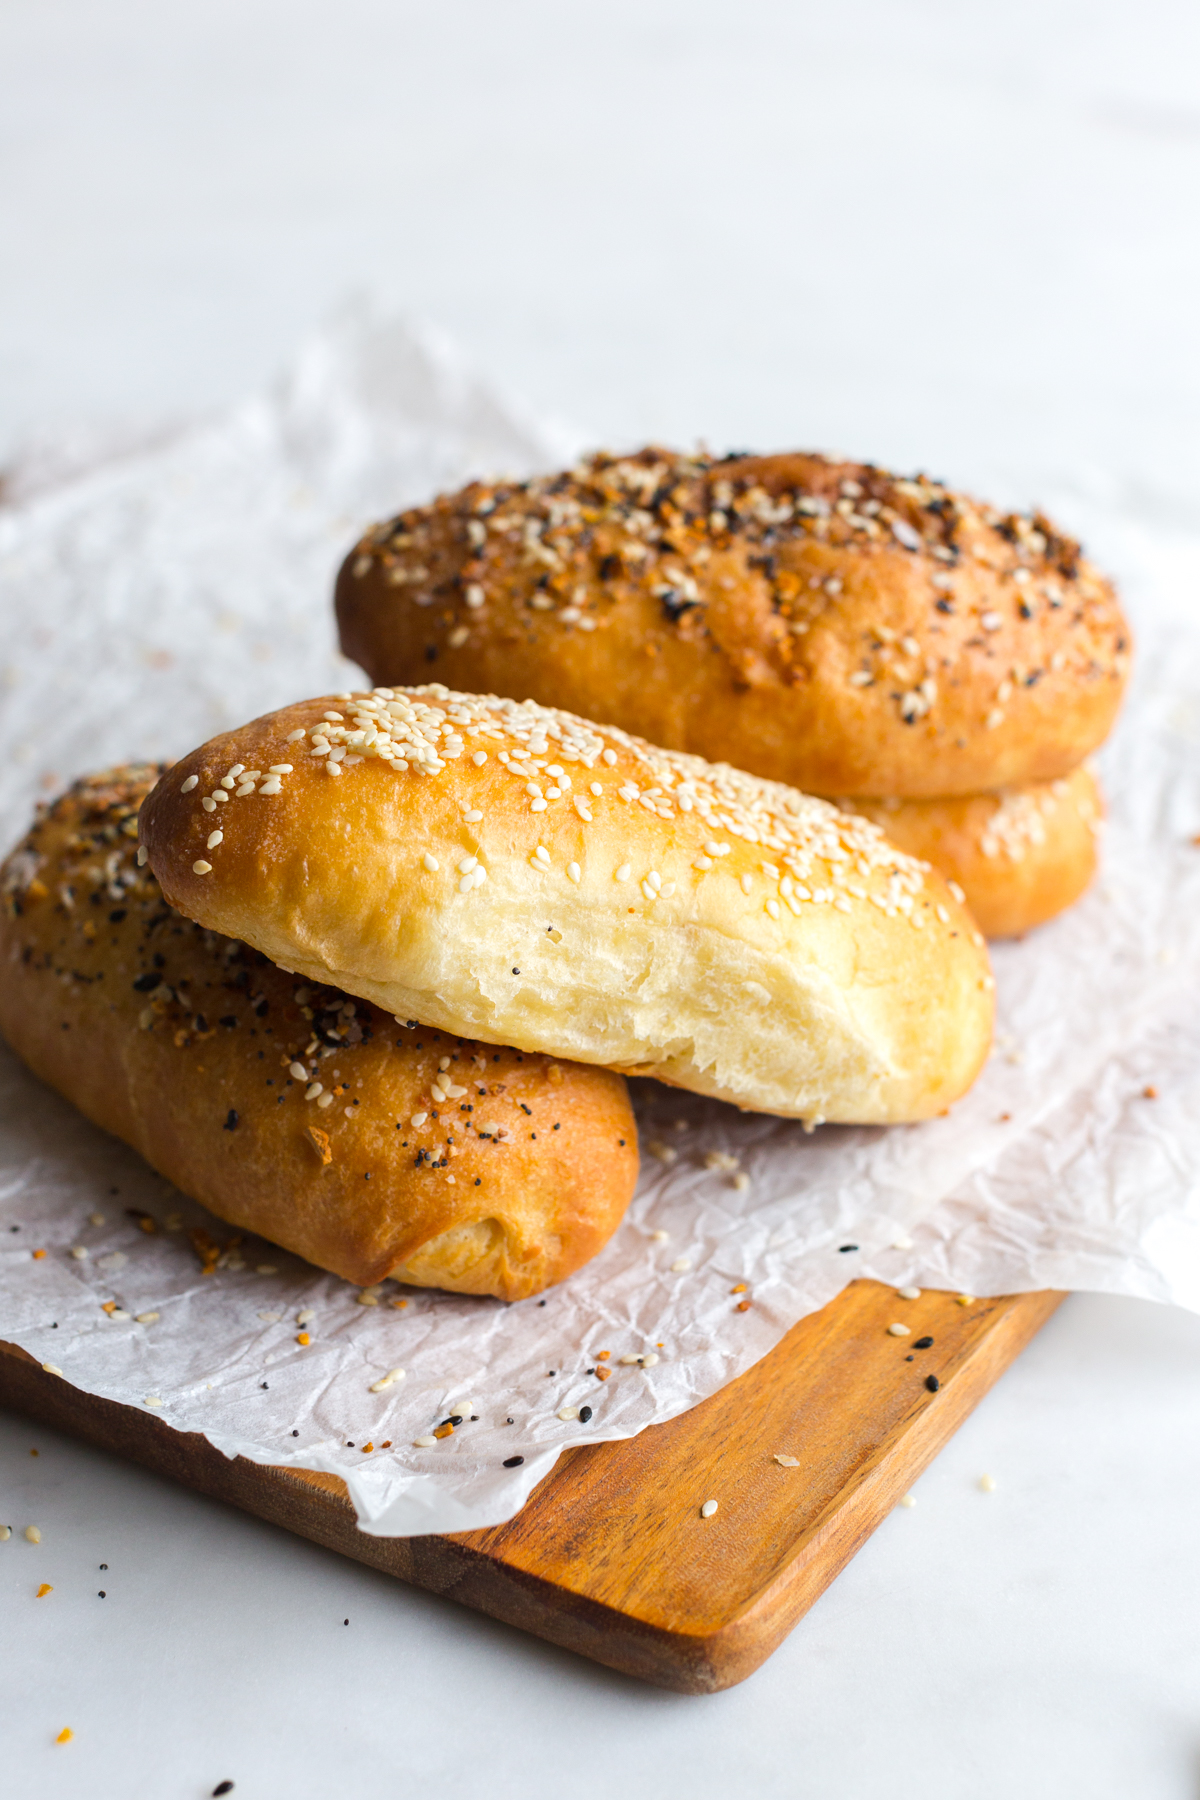 Hot Dog Buns with everything bagel seasoning and sesame seeds